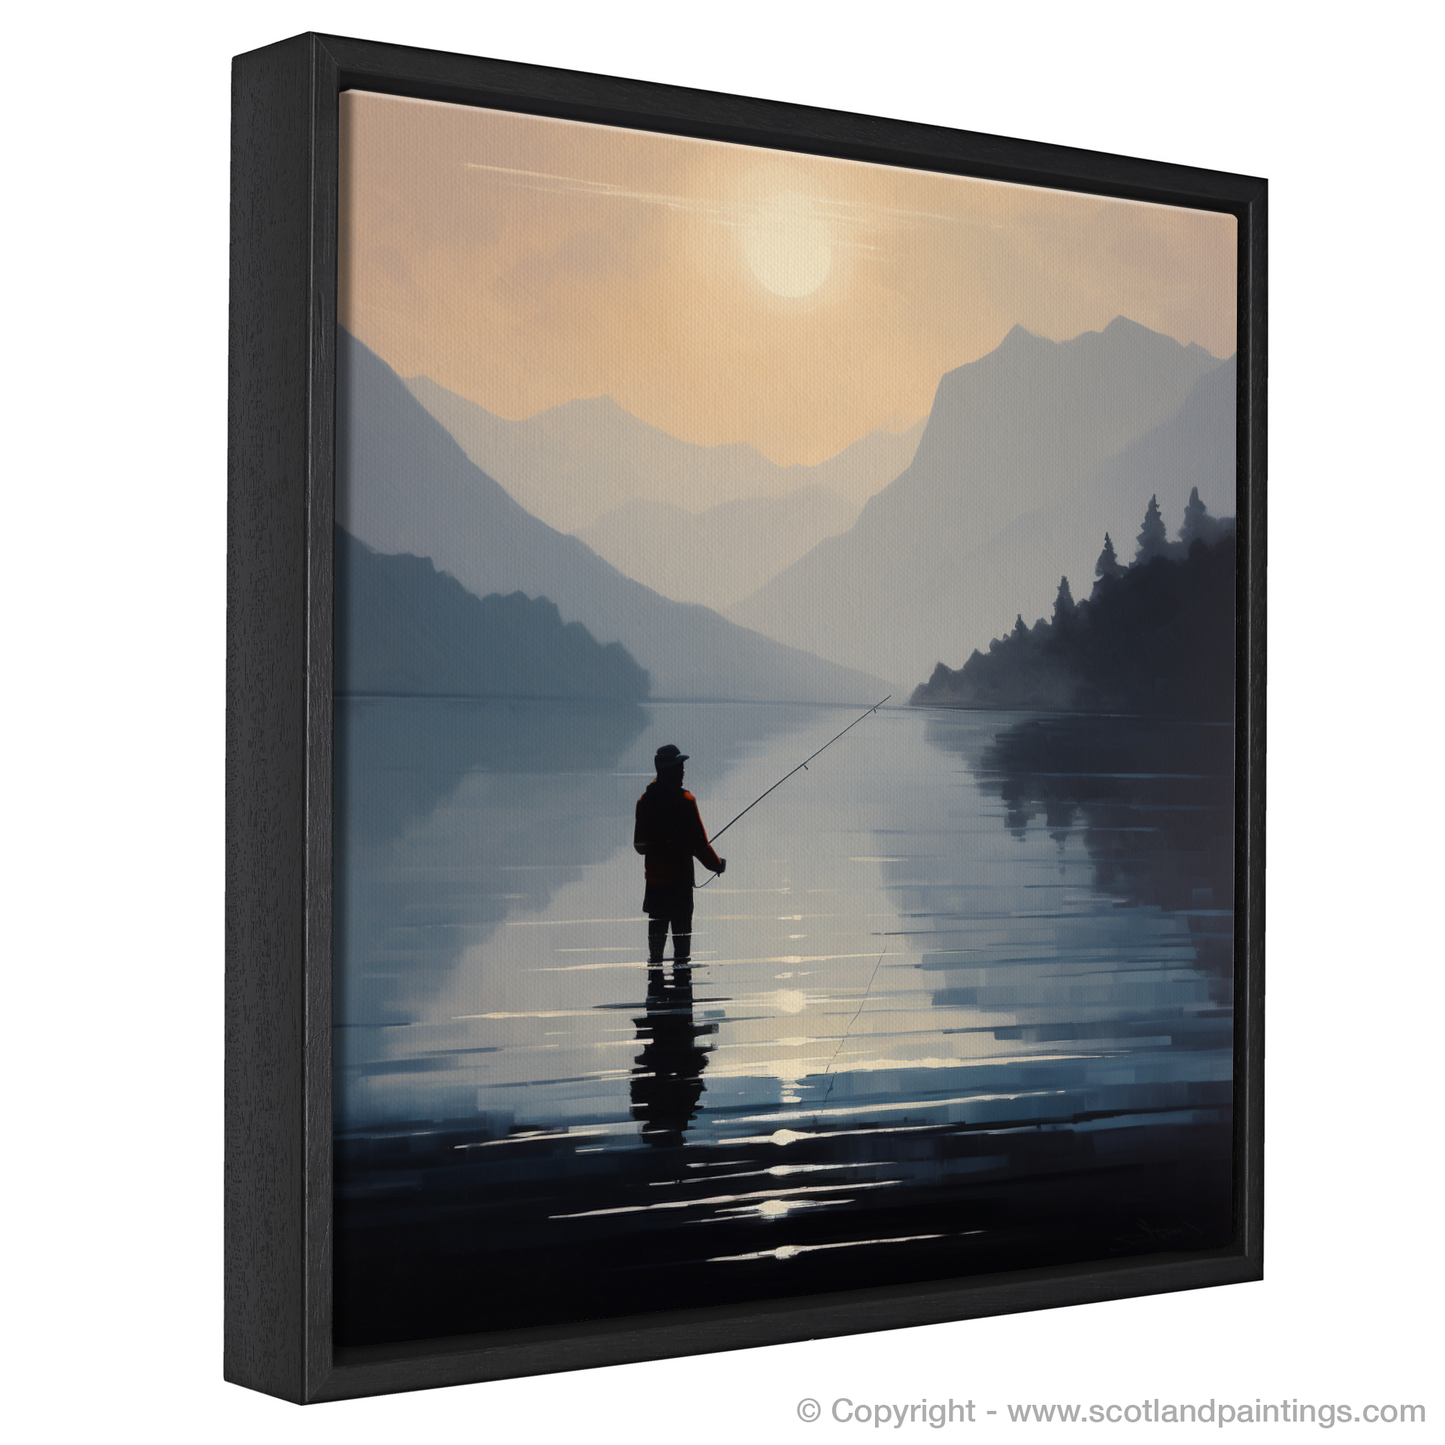 Painting and Art Print of Silhouetted fisherman on Loch Lomond entitled "Silhouetted Fisherman at Dusk on Loch Lomond".